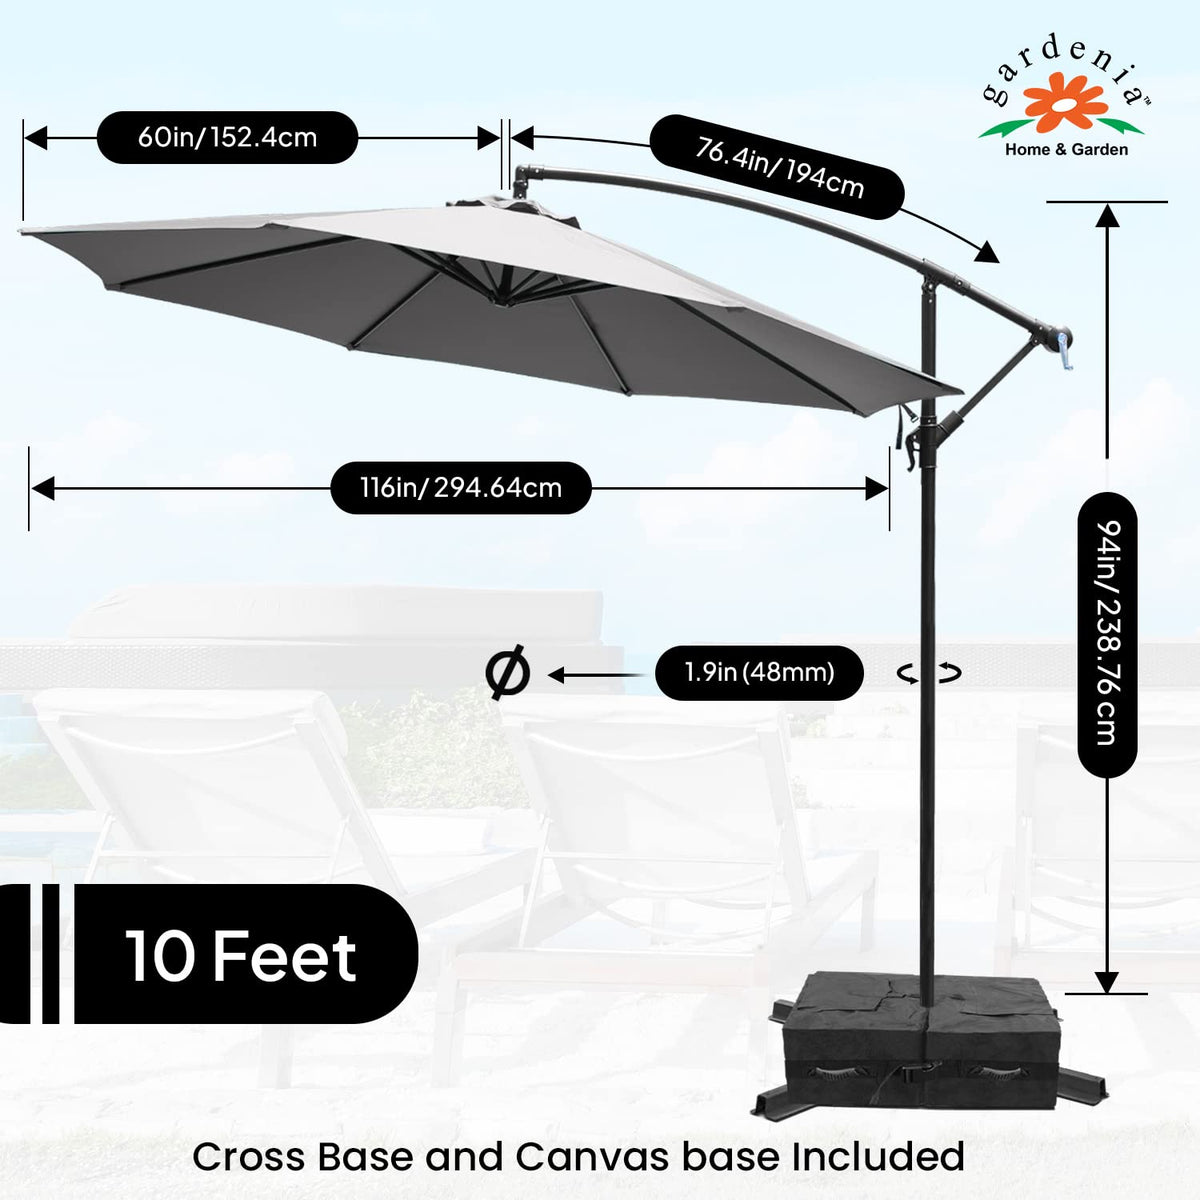 10ft Cantilever Umbrella with Detachable Base - Charcoal Gray